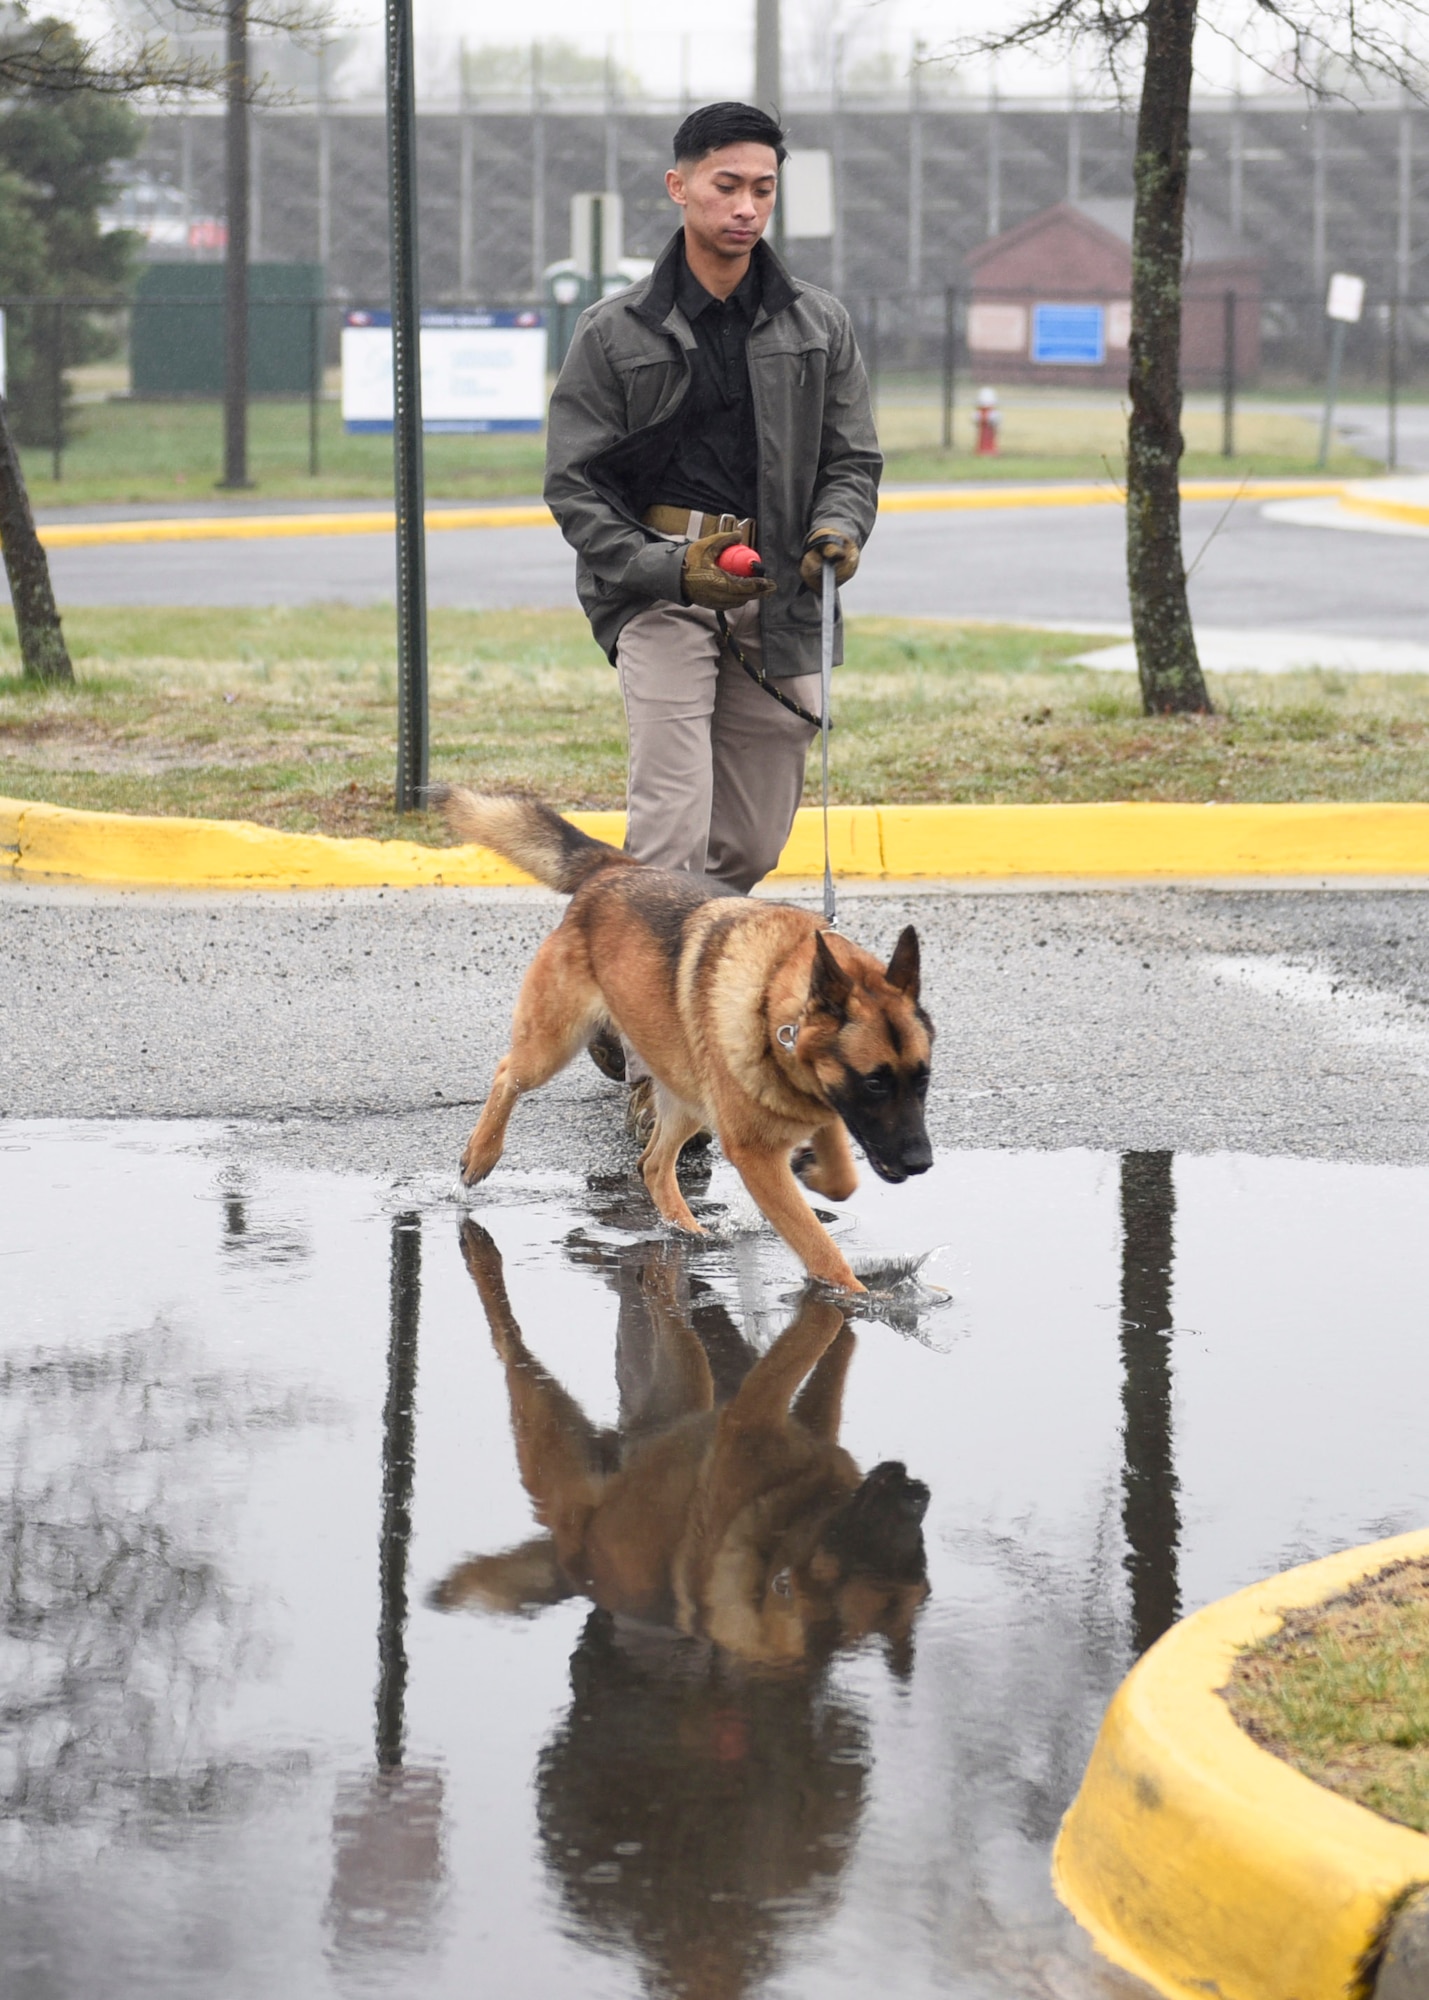 Senior Airman Alistair Dela Cruz, 316th Security Support Squadron military working dog handler, takes MWD Fill for a walk prior to the Multi-Agency K-9 Explosive Training Event at Thomas A. Edison High School in Alexandria, Va., Apr. 6, 2022. Handlers attend this training quarterly and the 316th SSPTS tries to send MWD teams who have never attended in the past. (U.S. Air Force photo by Airman 1st Class Austin Pate)